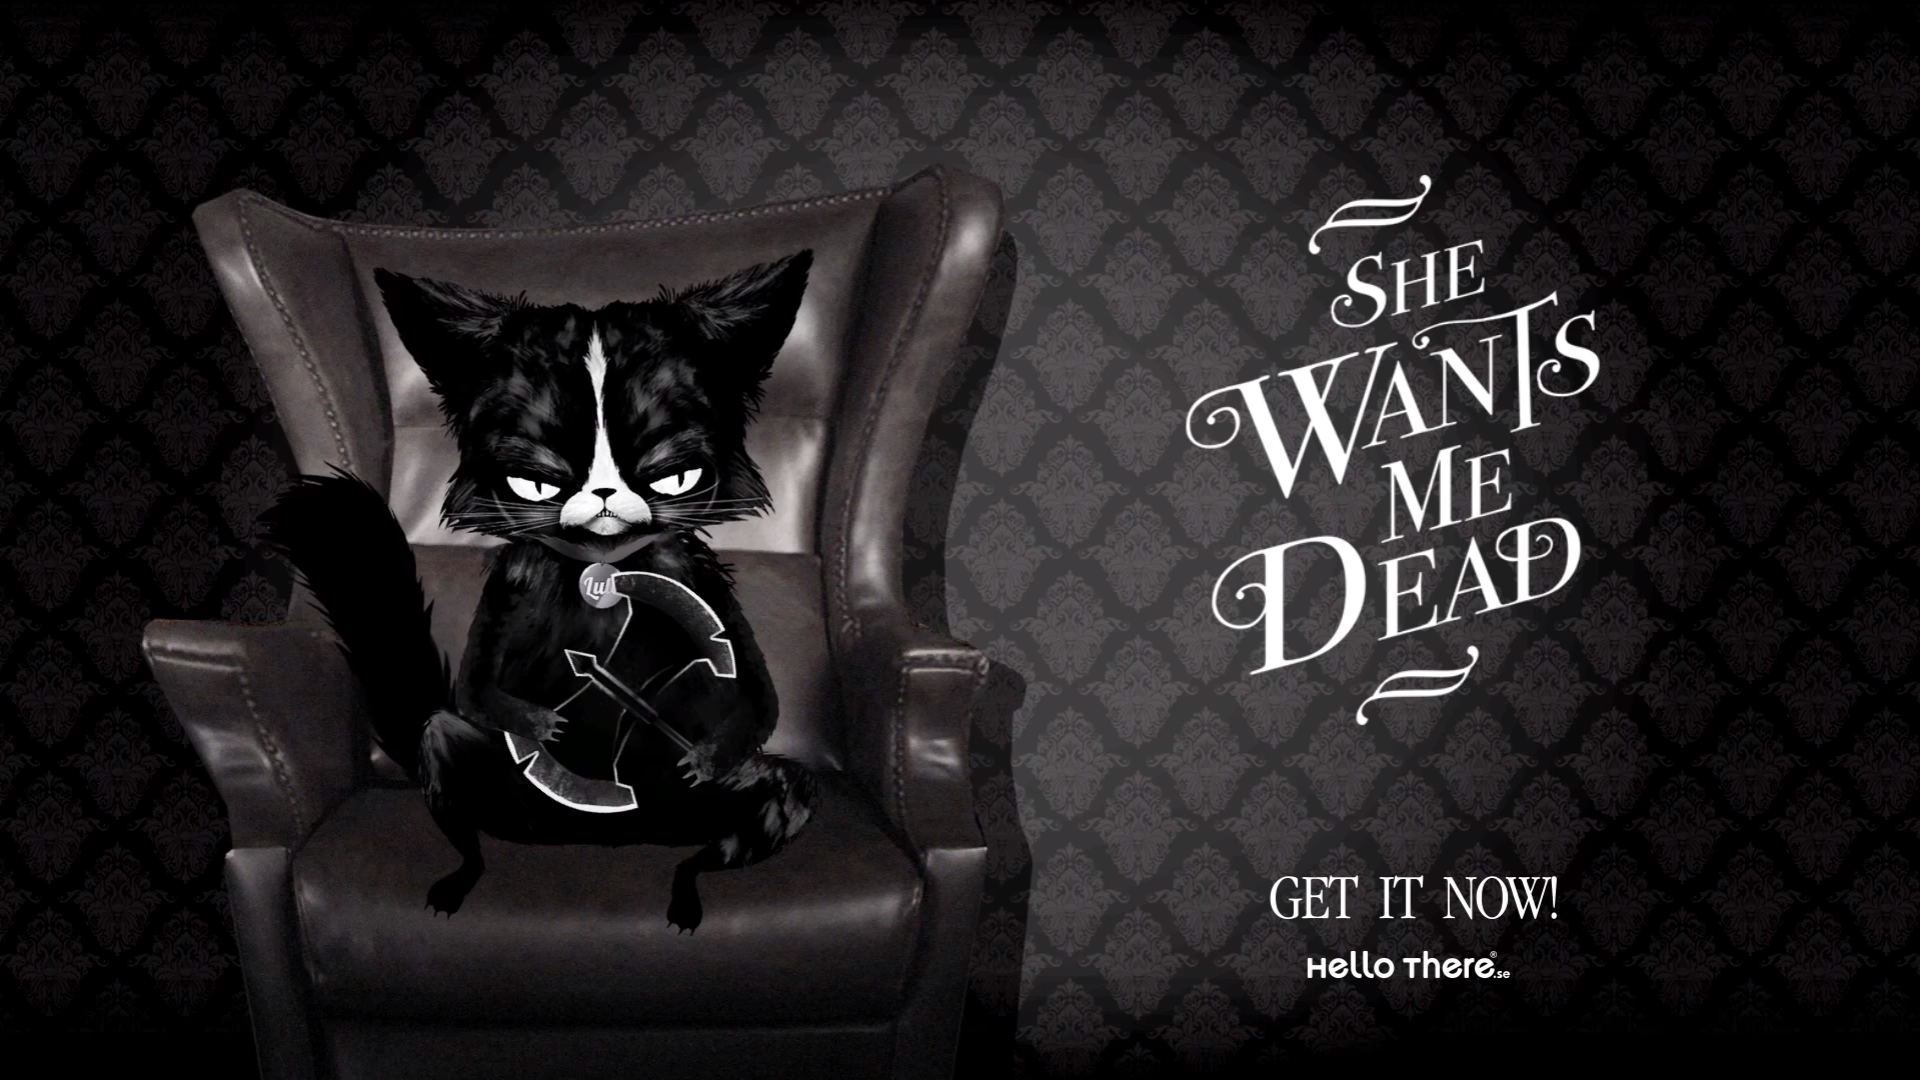 Ps4 Exclusive She Wants Me Dead Officially Announced Releasing Today